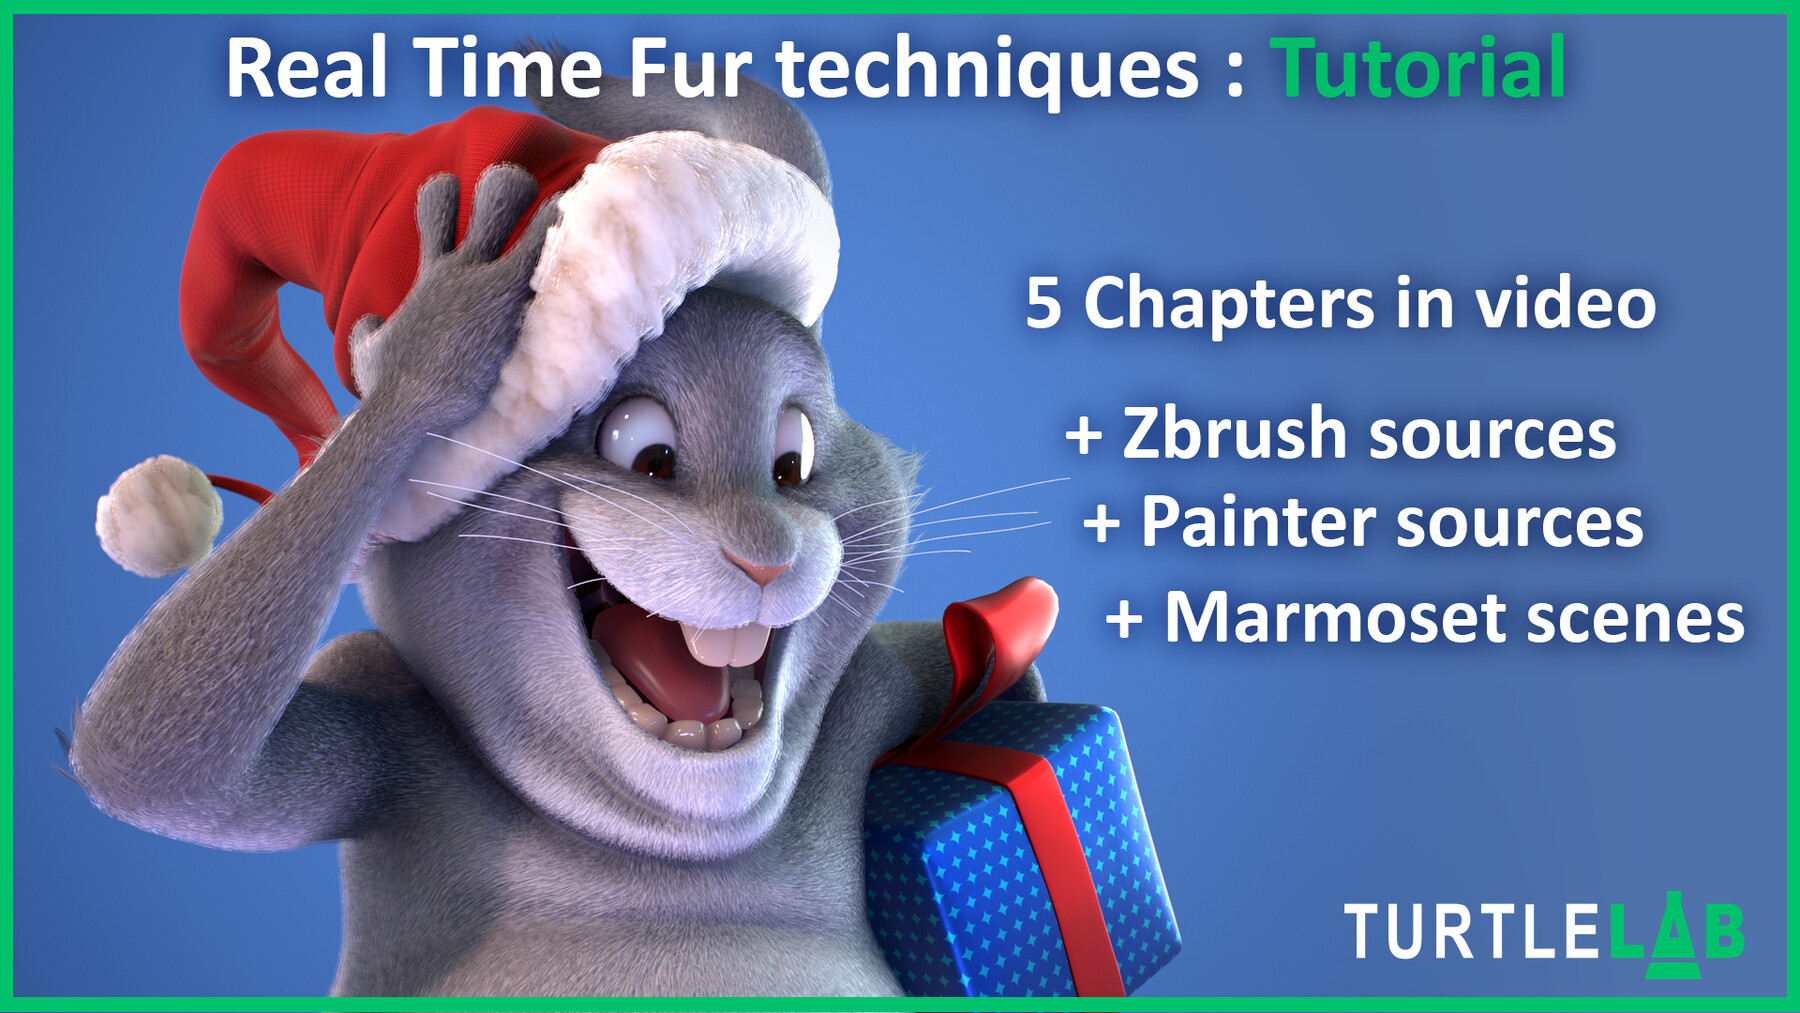 Turtle LAB - Real Time Fur Techniques : Tutorial